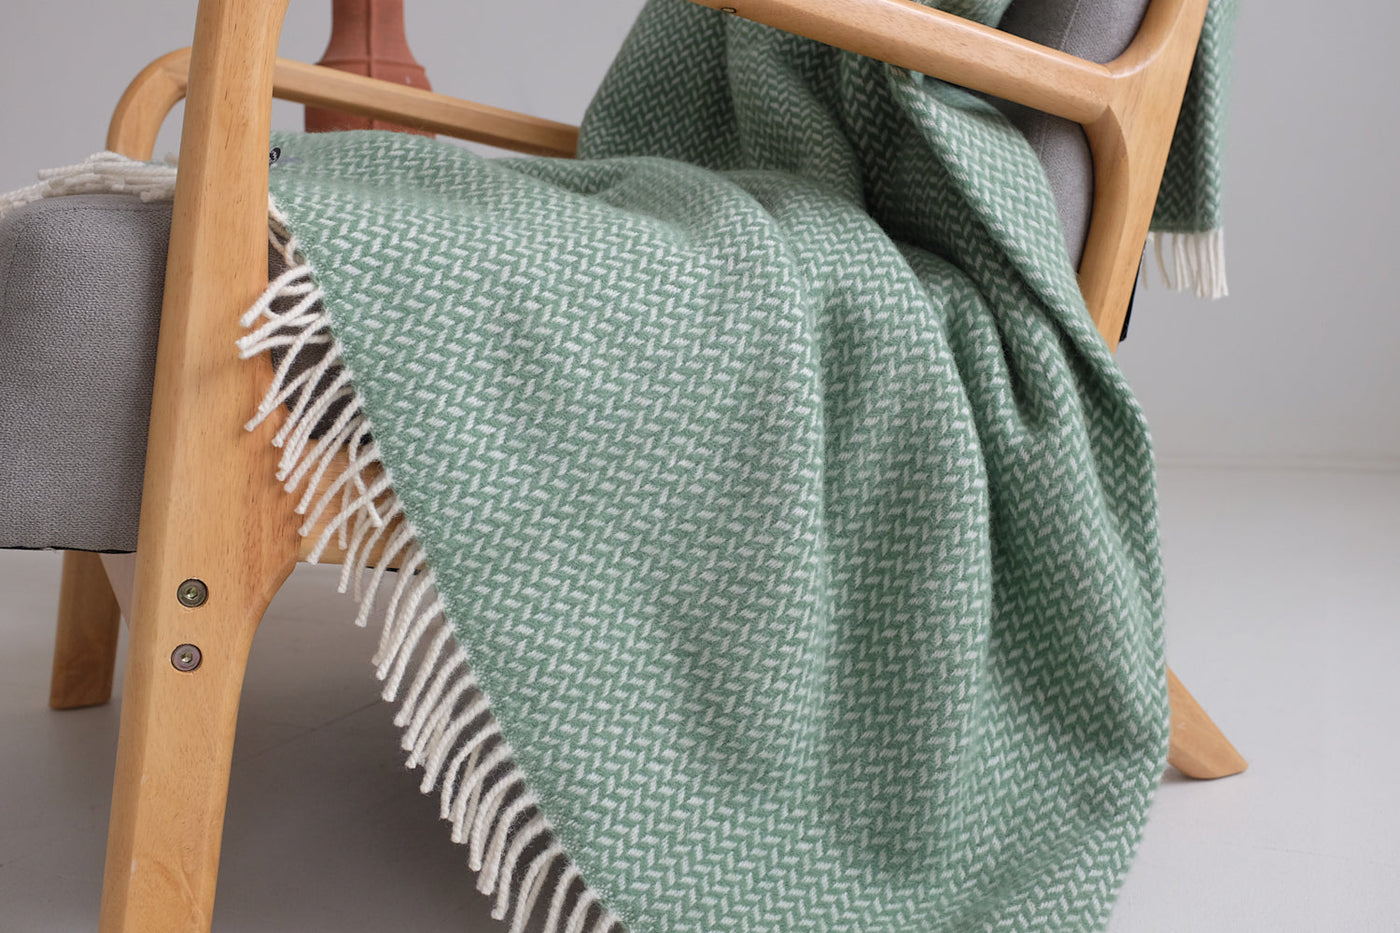 Extra large green herringbone wool blanket draping off the edge of a lounge chair